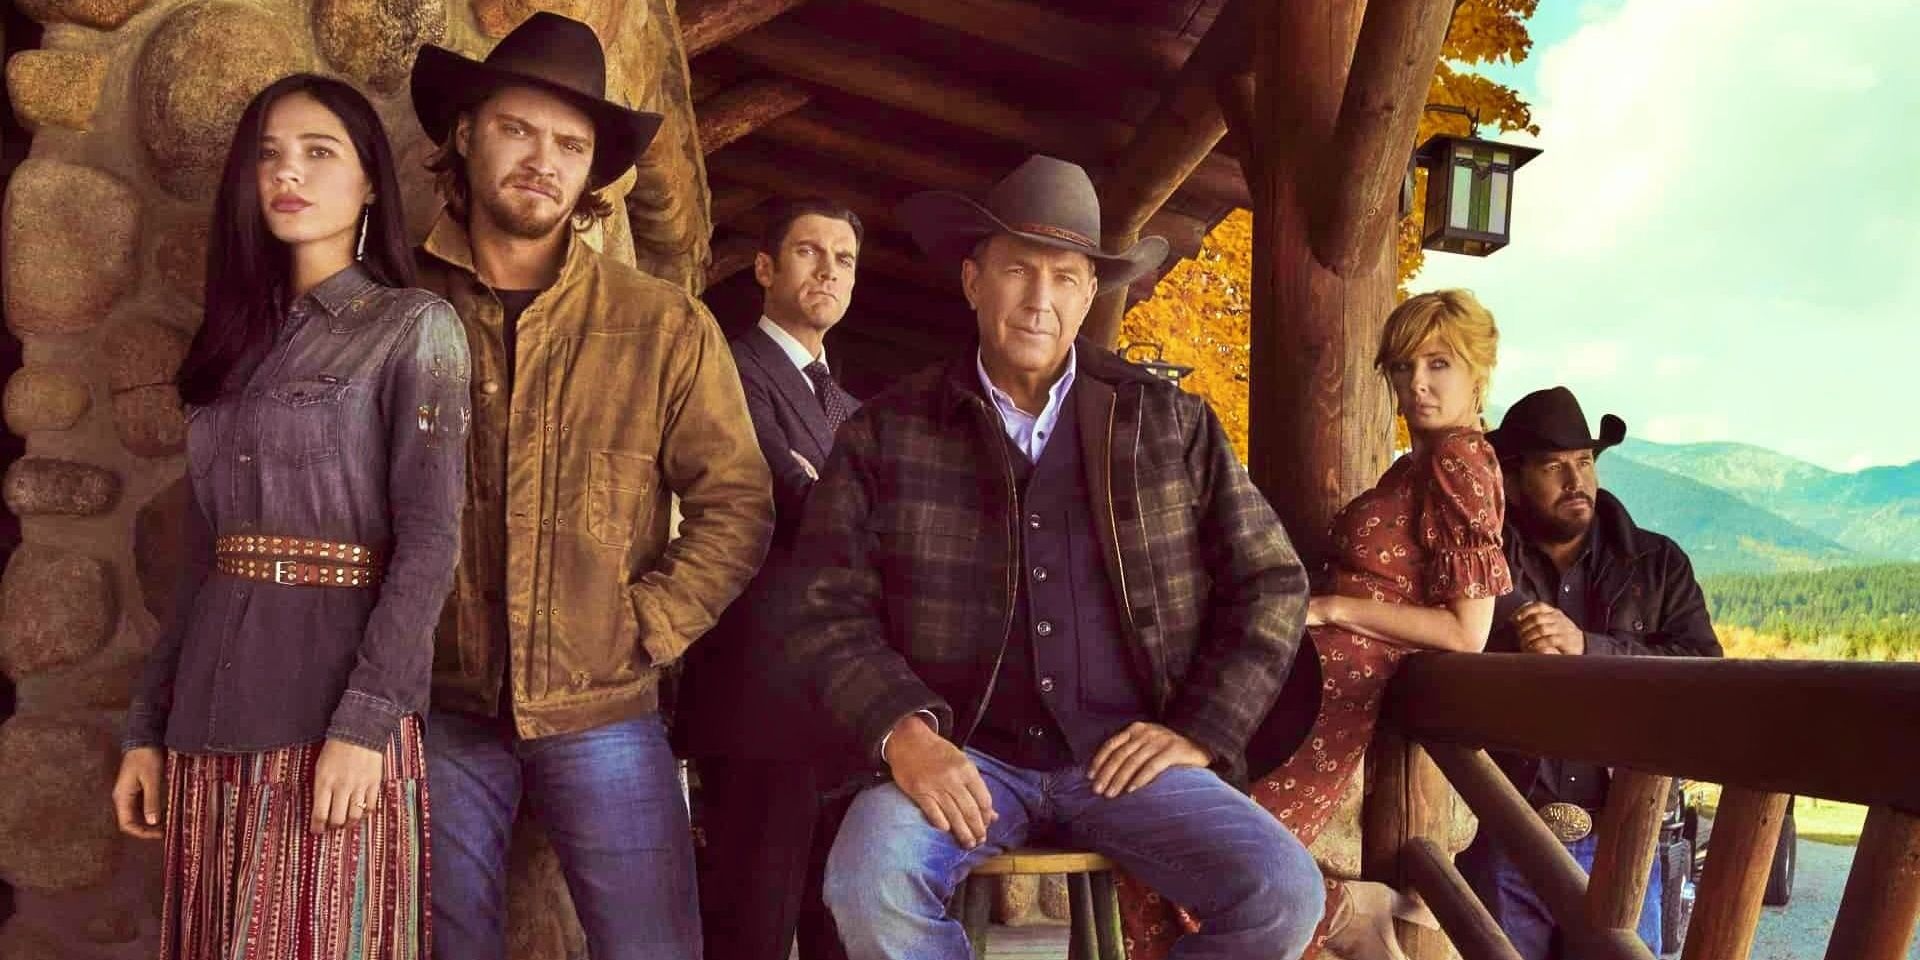 The cast of Yellowstone on a cabin porch